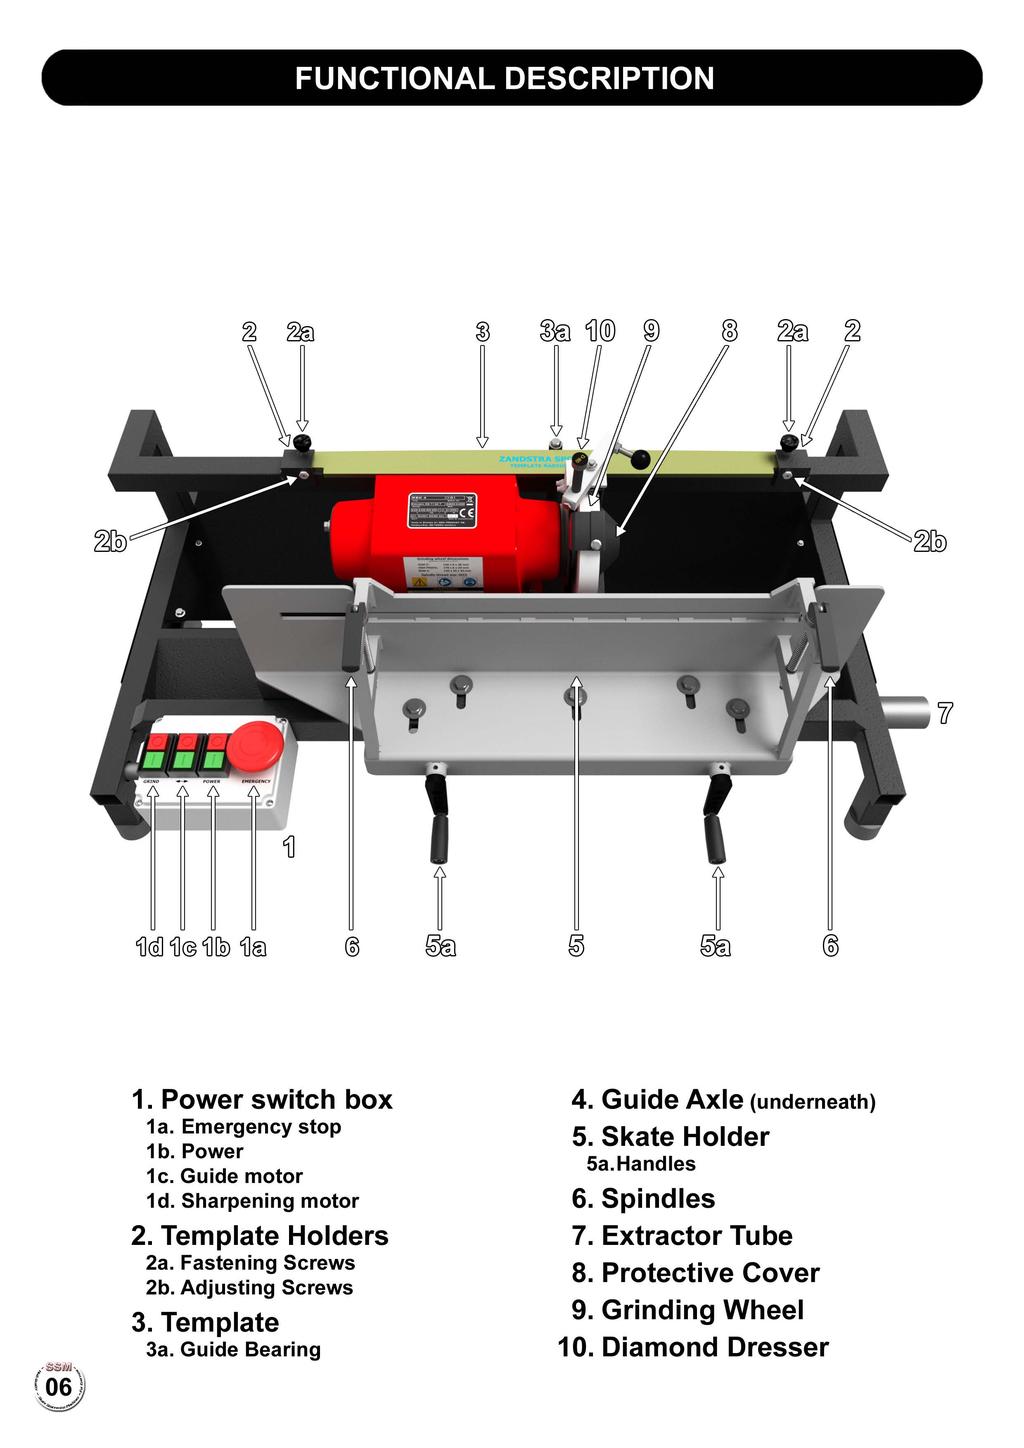 FUNCTIONAL DESCRIPTION 1. Power switch box 1 a. Emergency stop 1b. Power 1c. Guide motor 1 d. Sharpening motor 2. Template Holders 2a. Fastening Screws 2b.